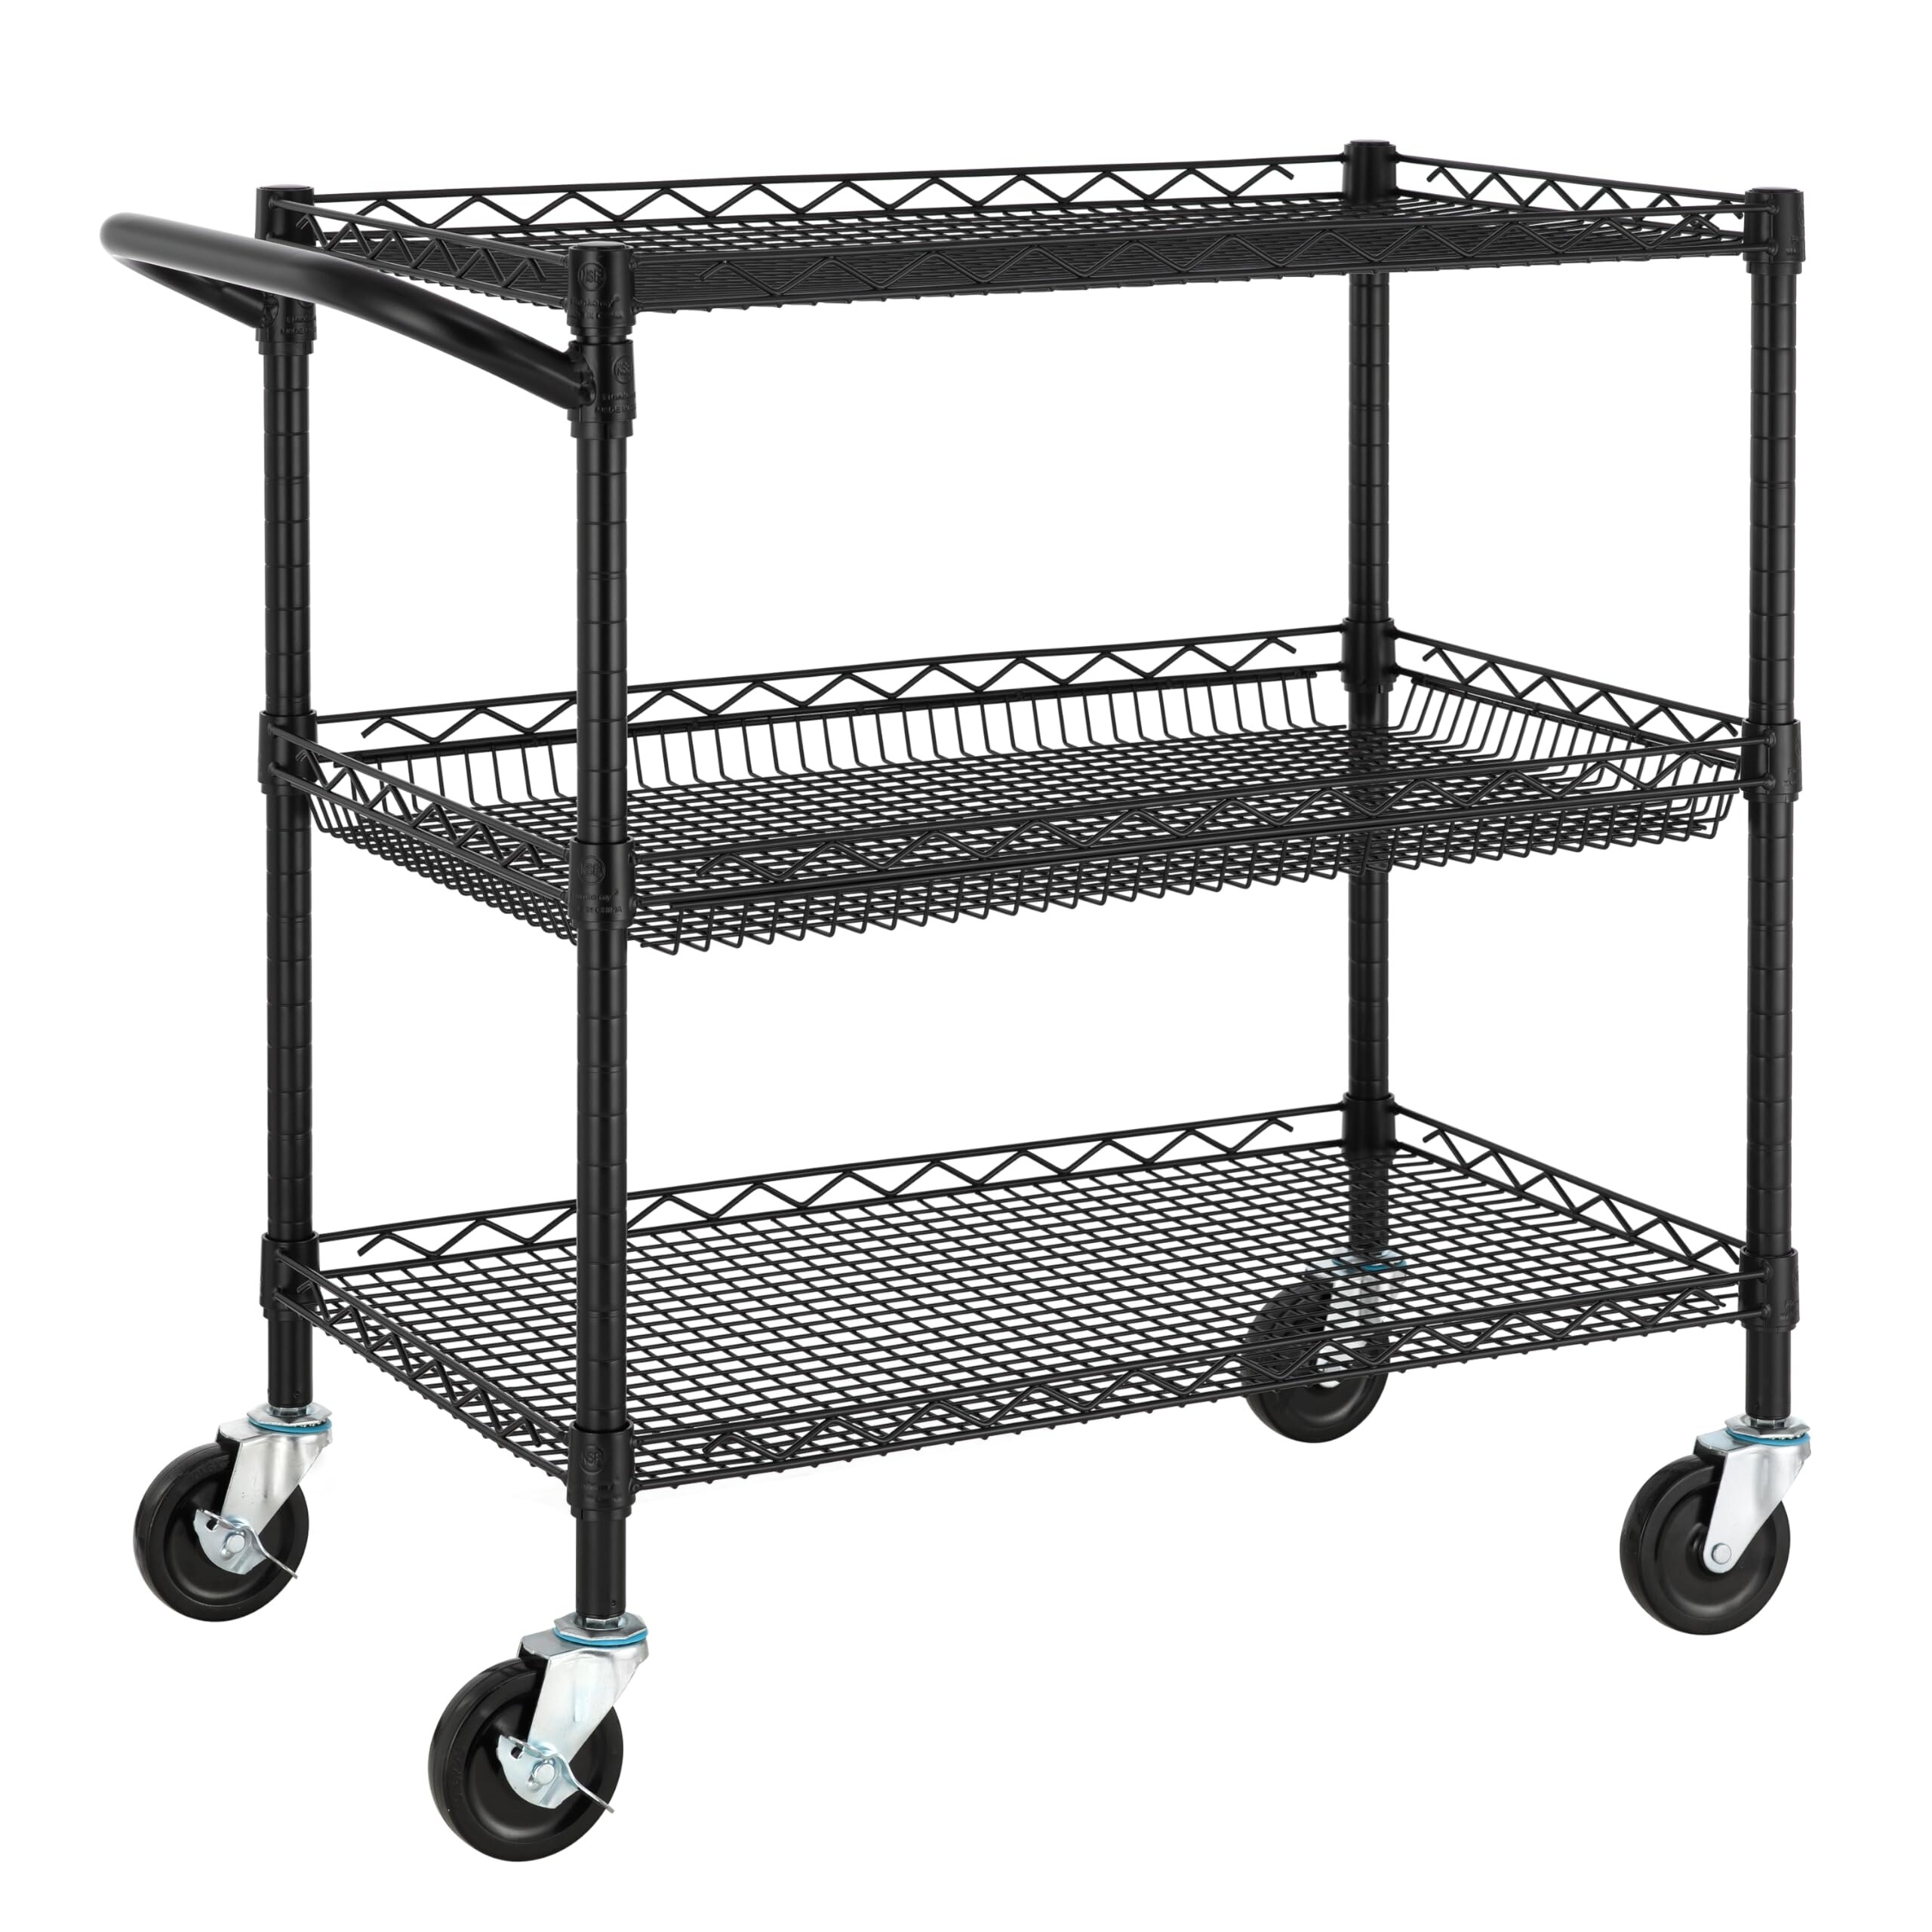 https://ak1.ostkcdn.com/images/products/is/images/direct/bd66ce16edb833350872e5c8733e5b341d2feceb/3-Tier-Heavy-Duty-Commercial-Grade-Utility-Cart%2C-Wire-Rolling-Cart-with-Handle-Bar%2C-Steel-Service-Cart-with-Wheels.jpg